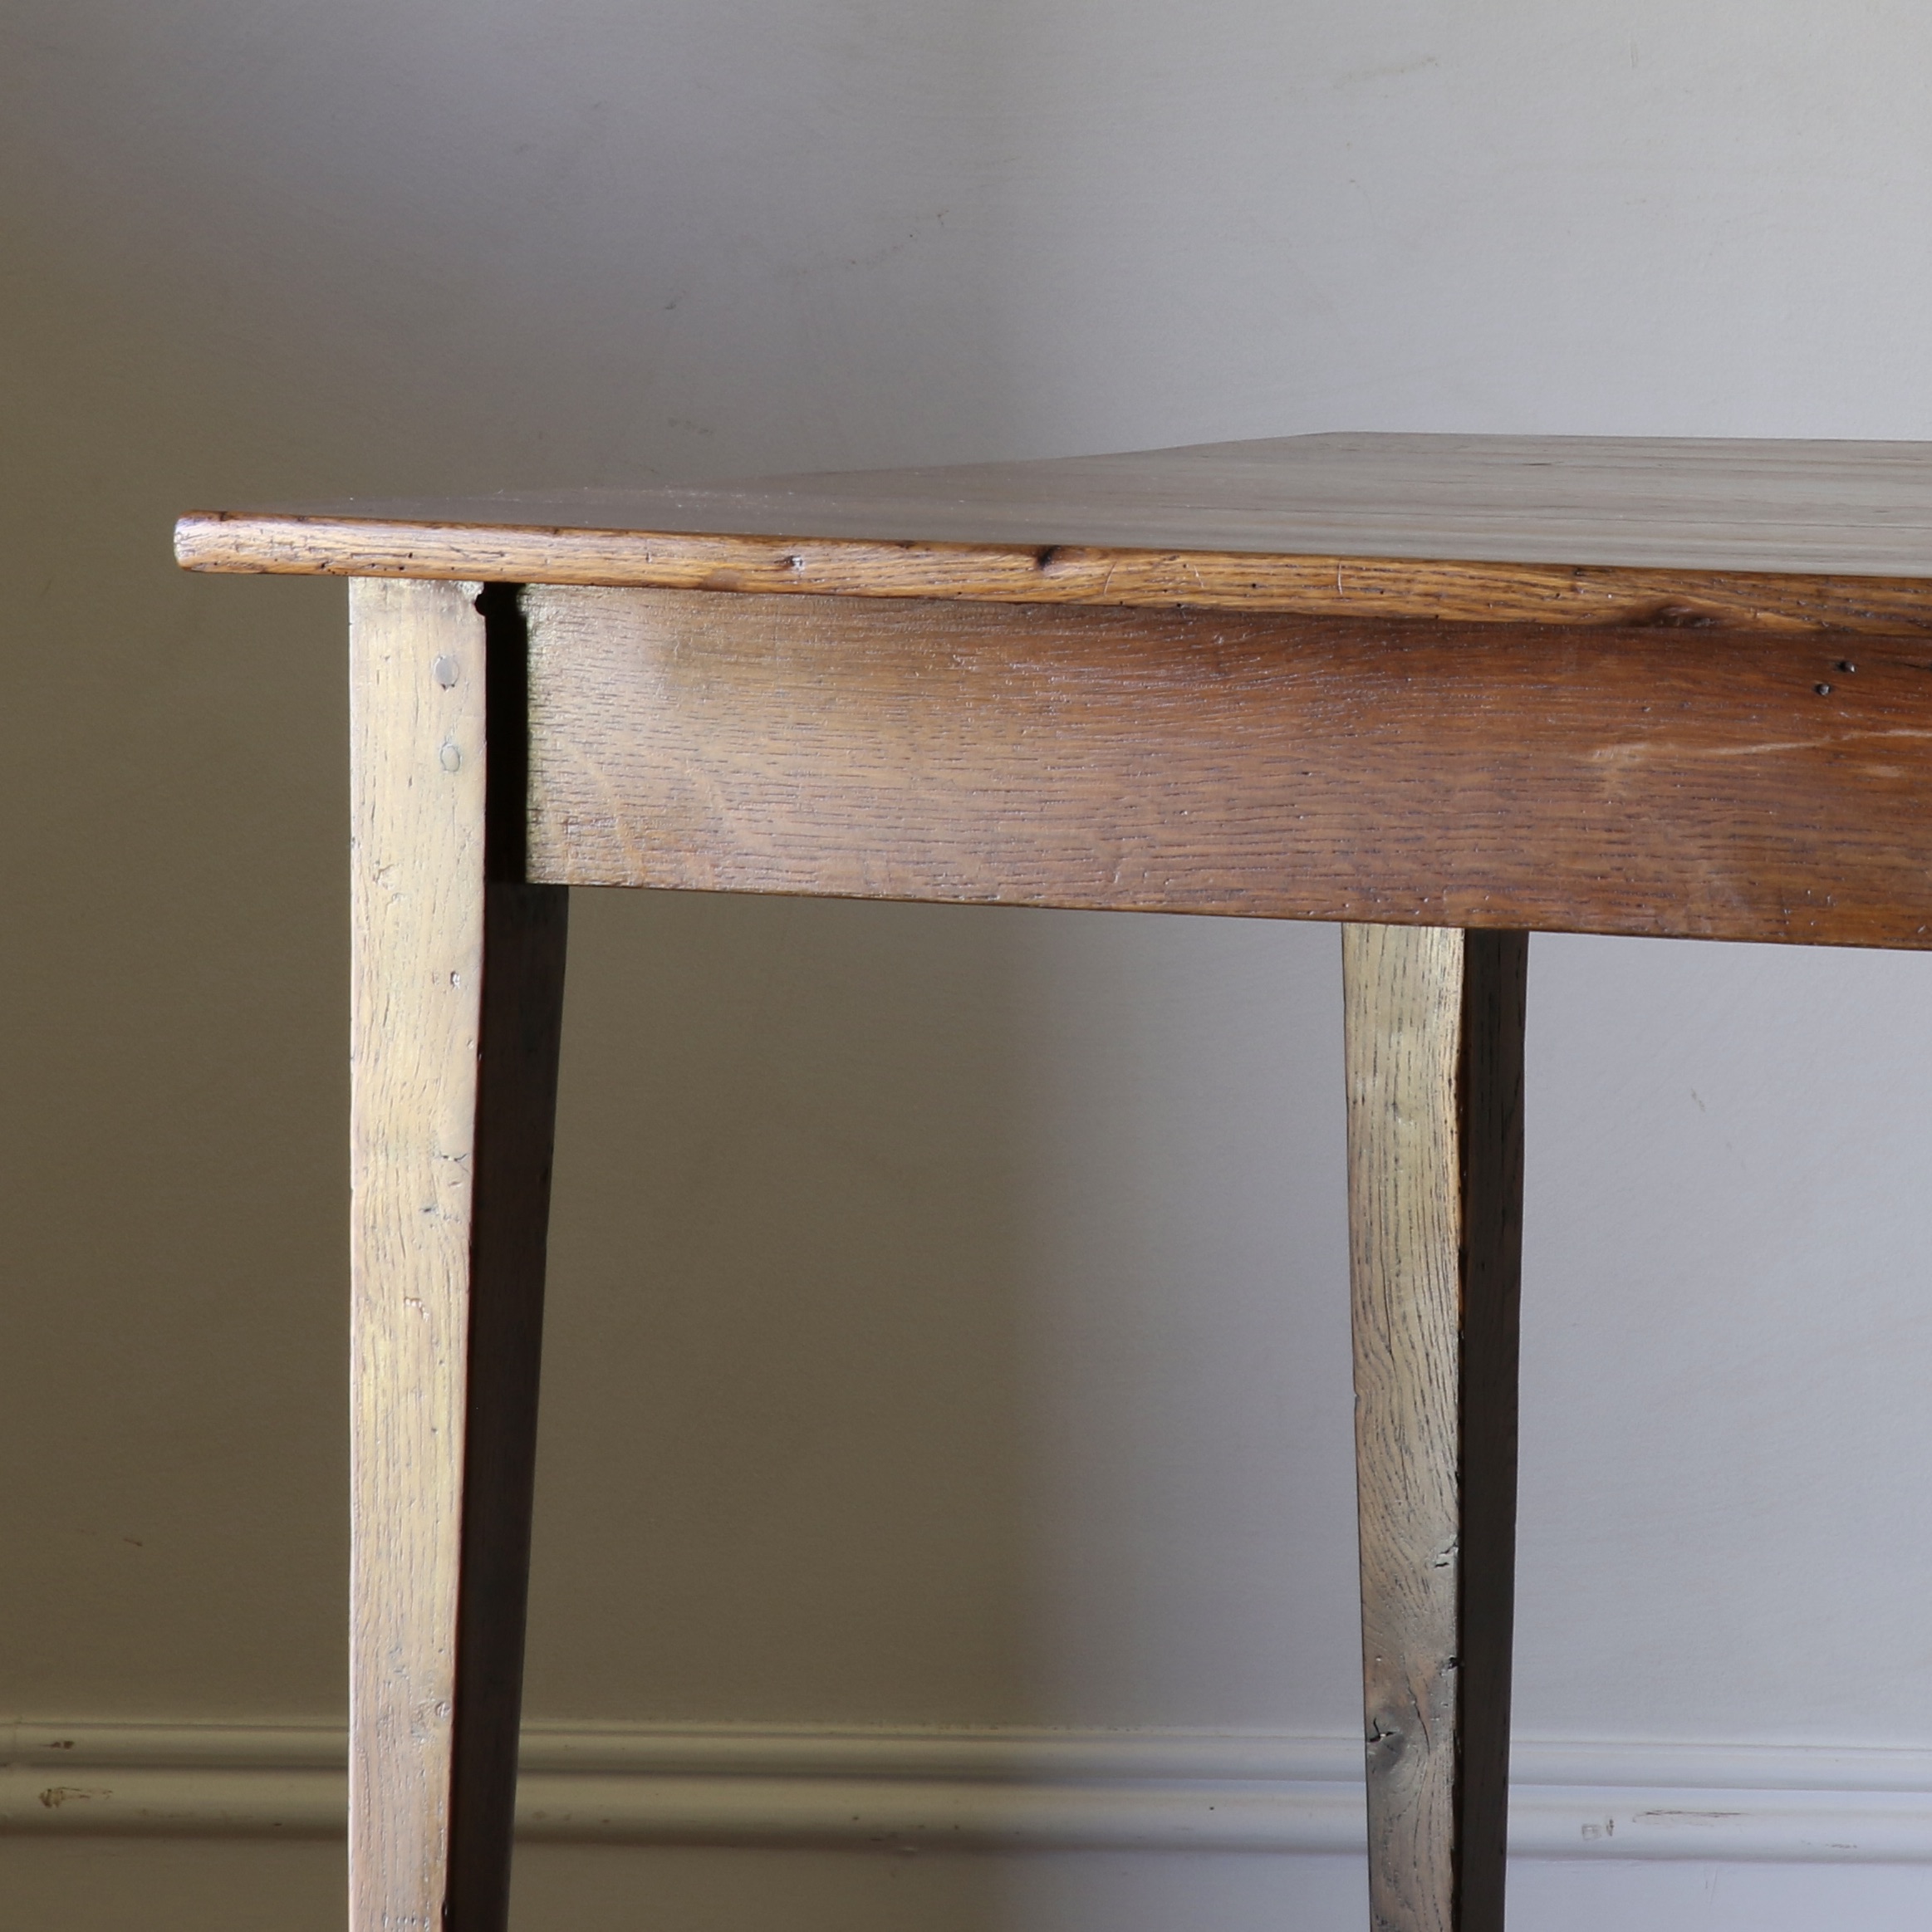 French Provincial Dining Table// Length 2.2m